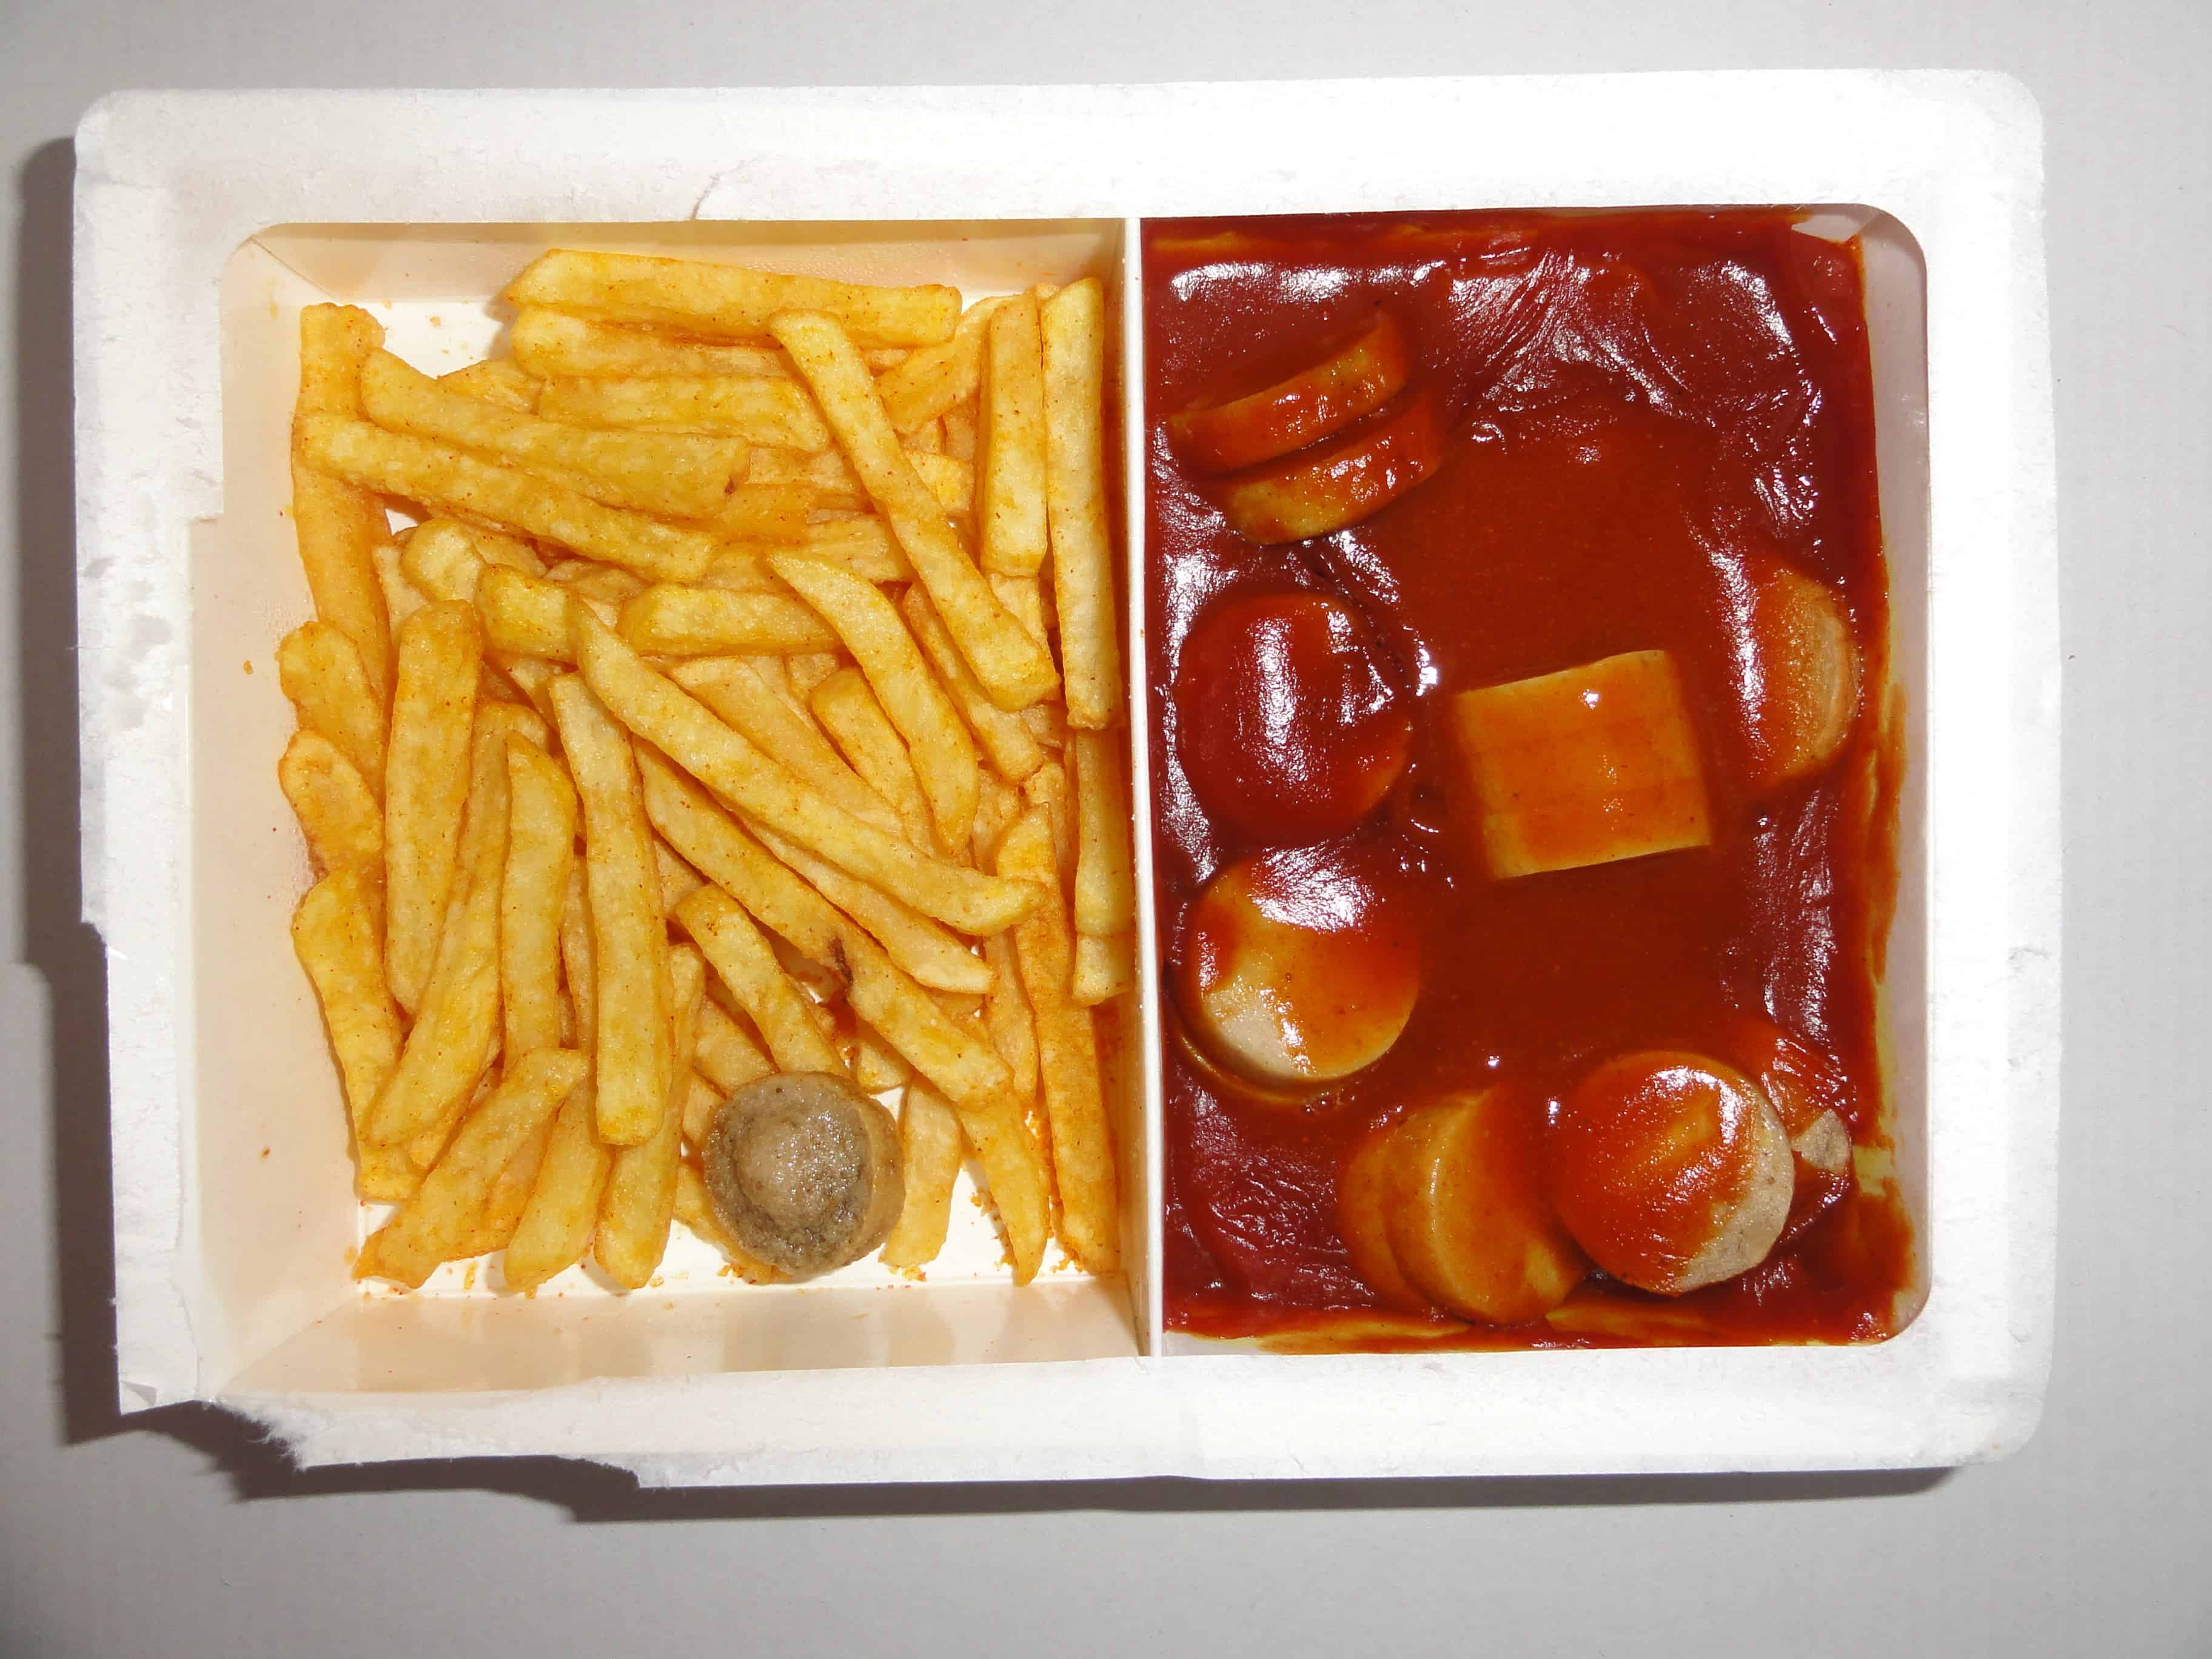 Ready to eat microwave food (TV dinner). Credit: Wikimedia Commons.